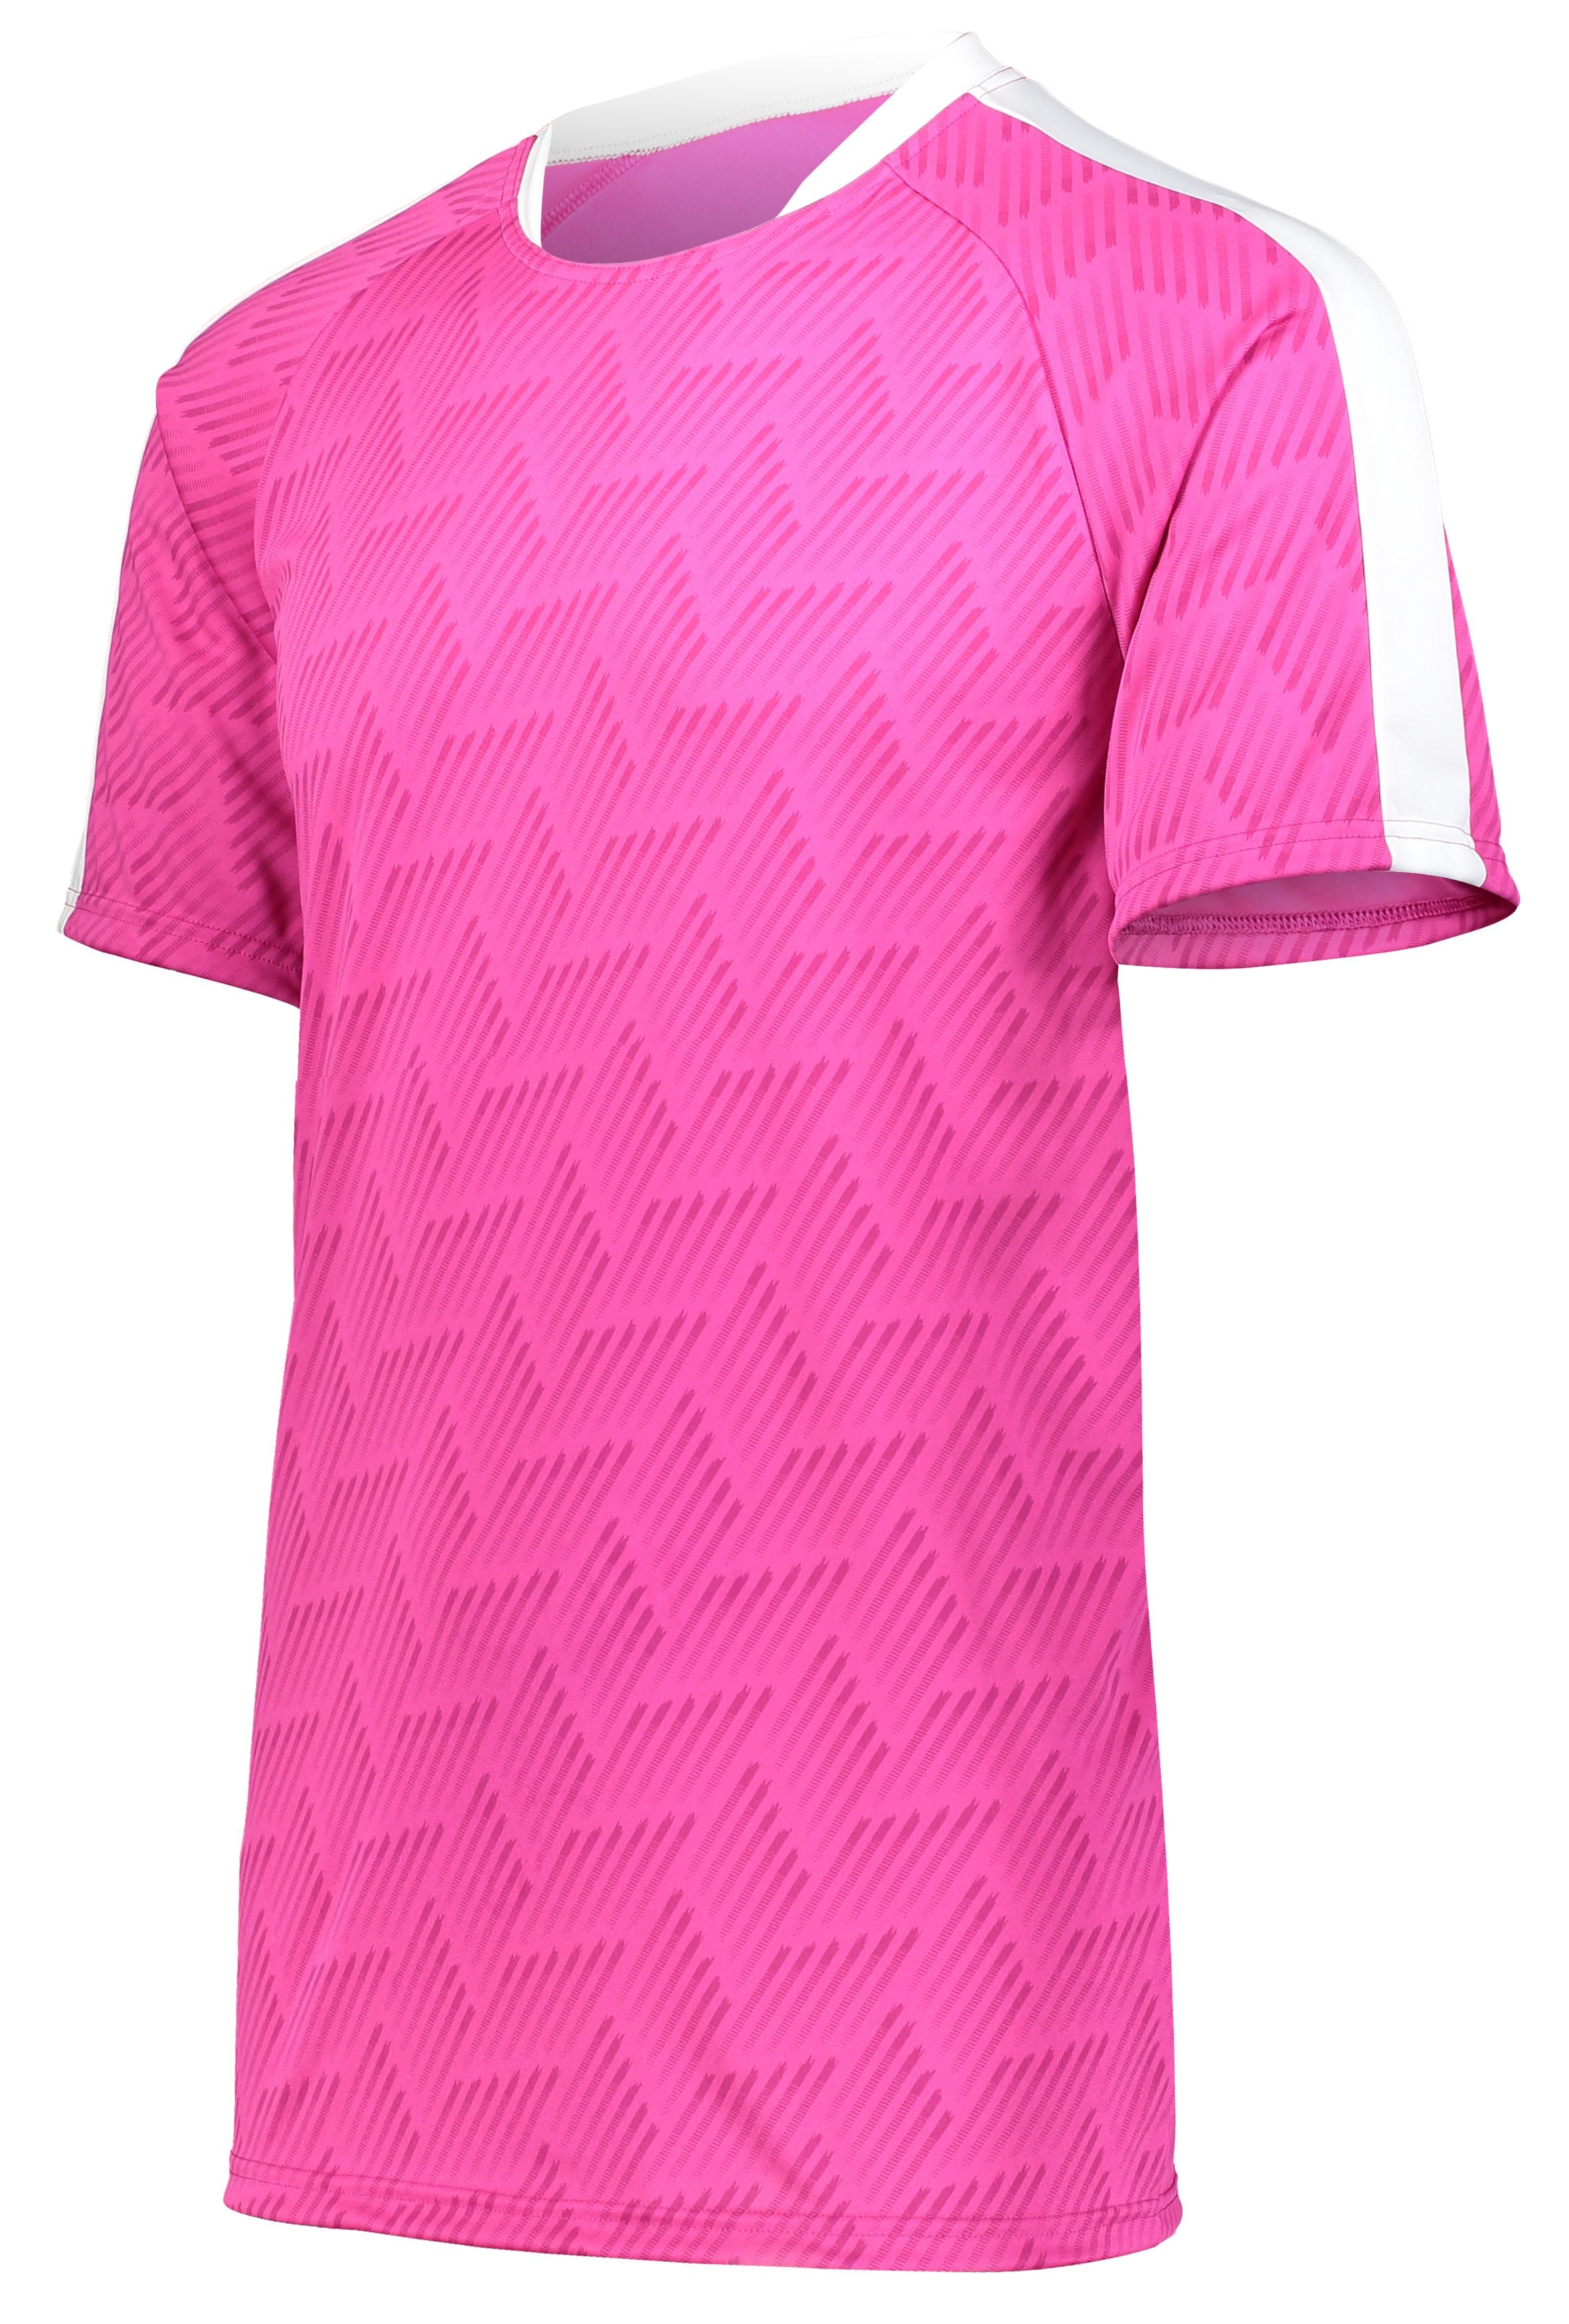 High 5 Youth Hypervolt Jersey in Power Pink Print/White  -Part of the Youth, Youth-Jersey, High5-Products, Soccer, Shirts, All-Sports-1 product lines at KanaleyCreations.com